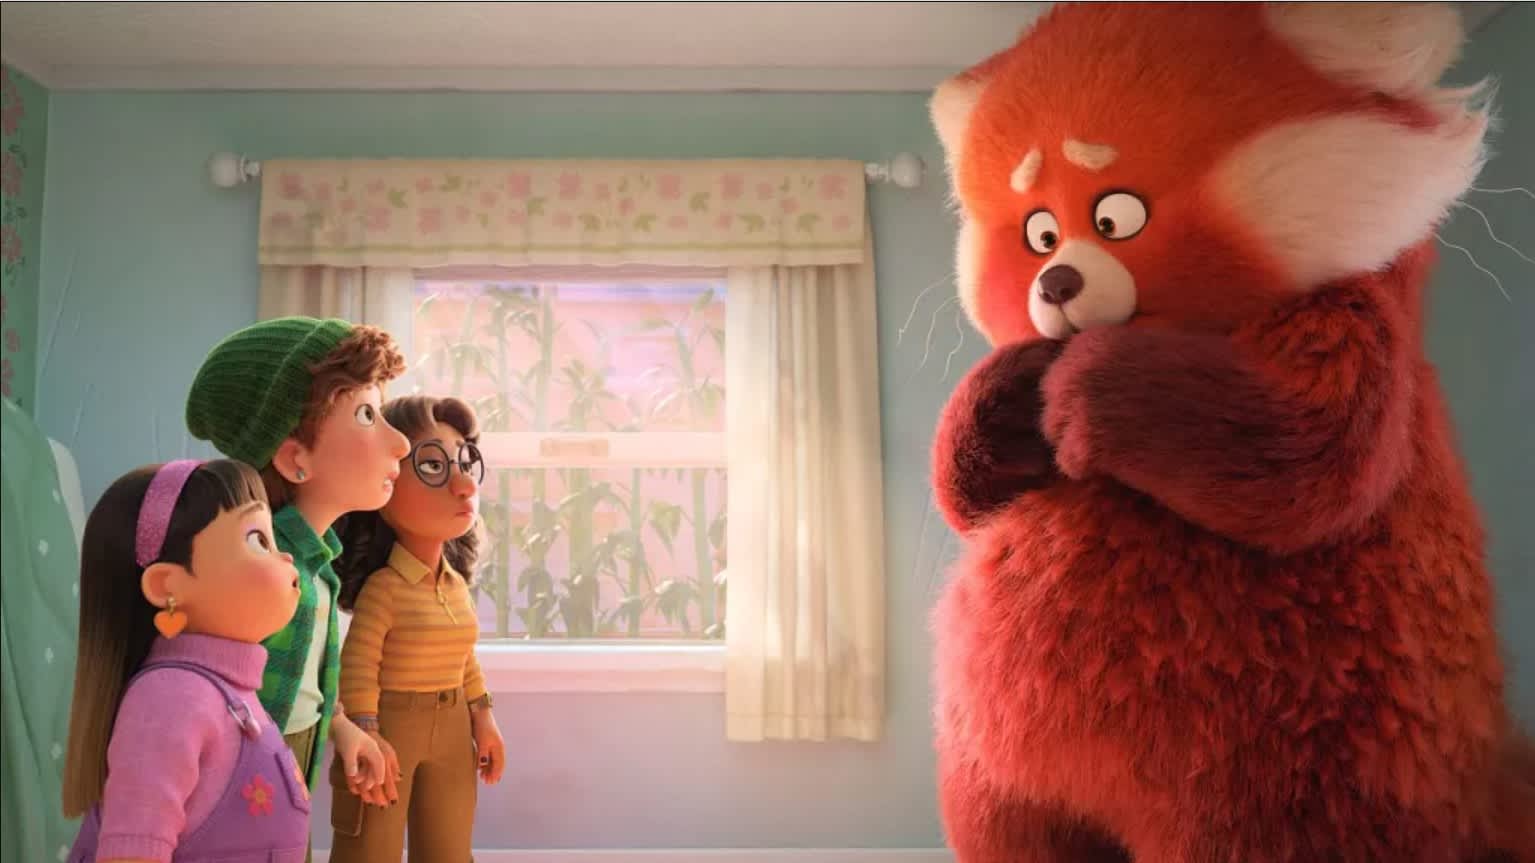 Pixar's 'Turning Red' to skip theaters, head straight to Disney+